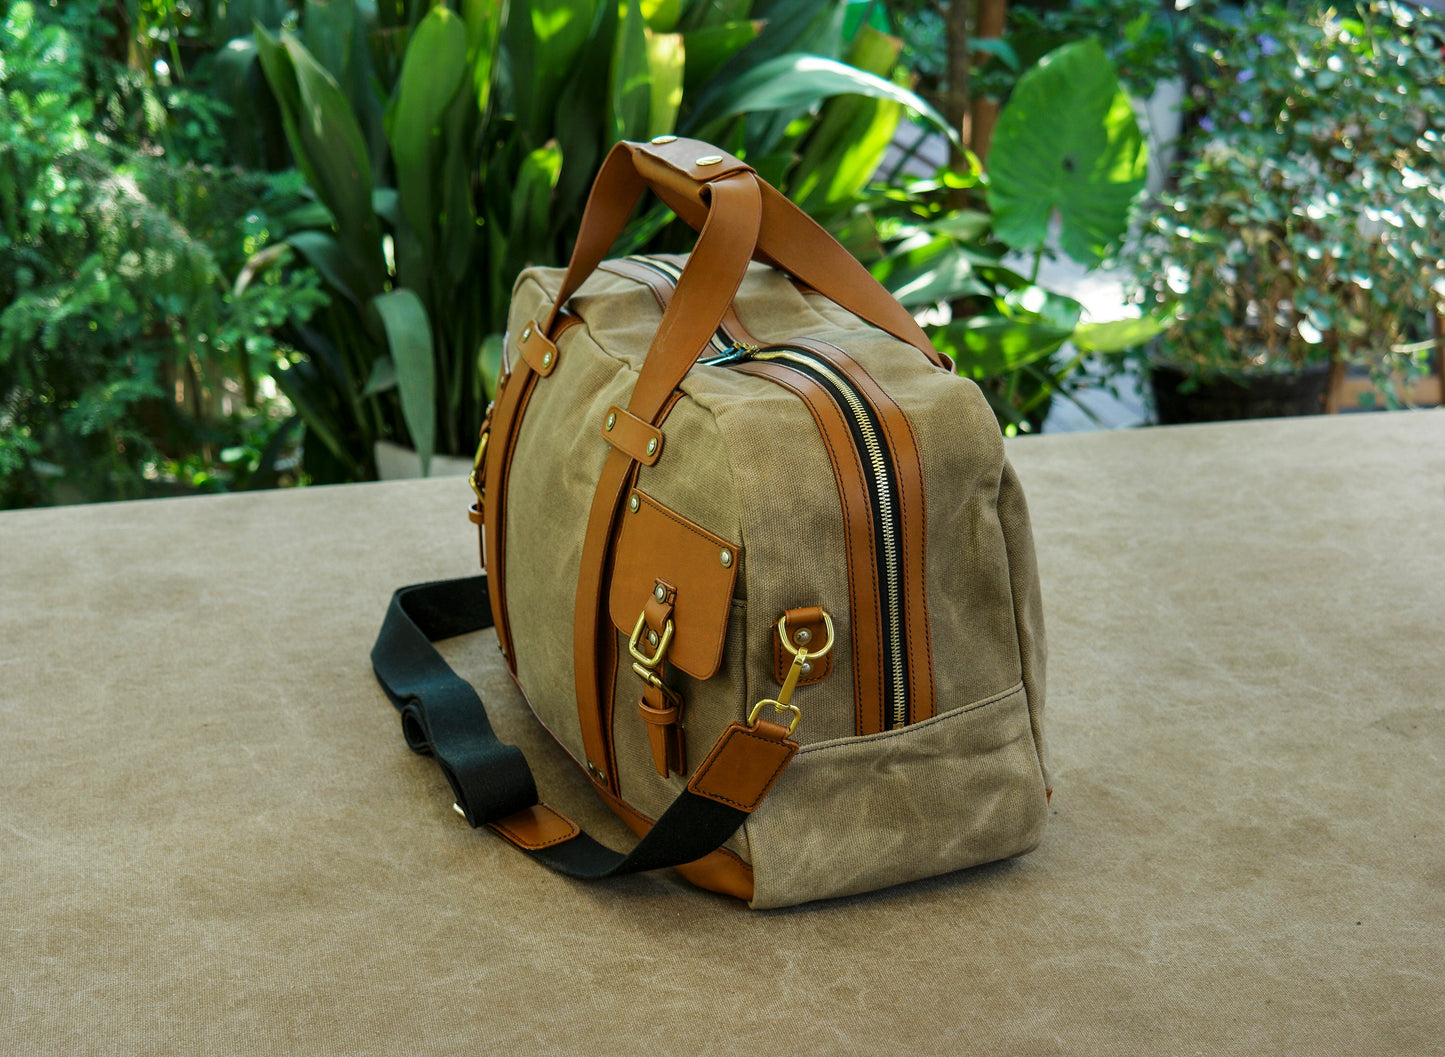 Duffle bag - Portable travel bag made of oil wax canvas and leather